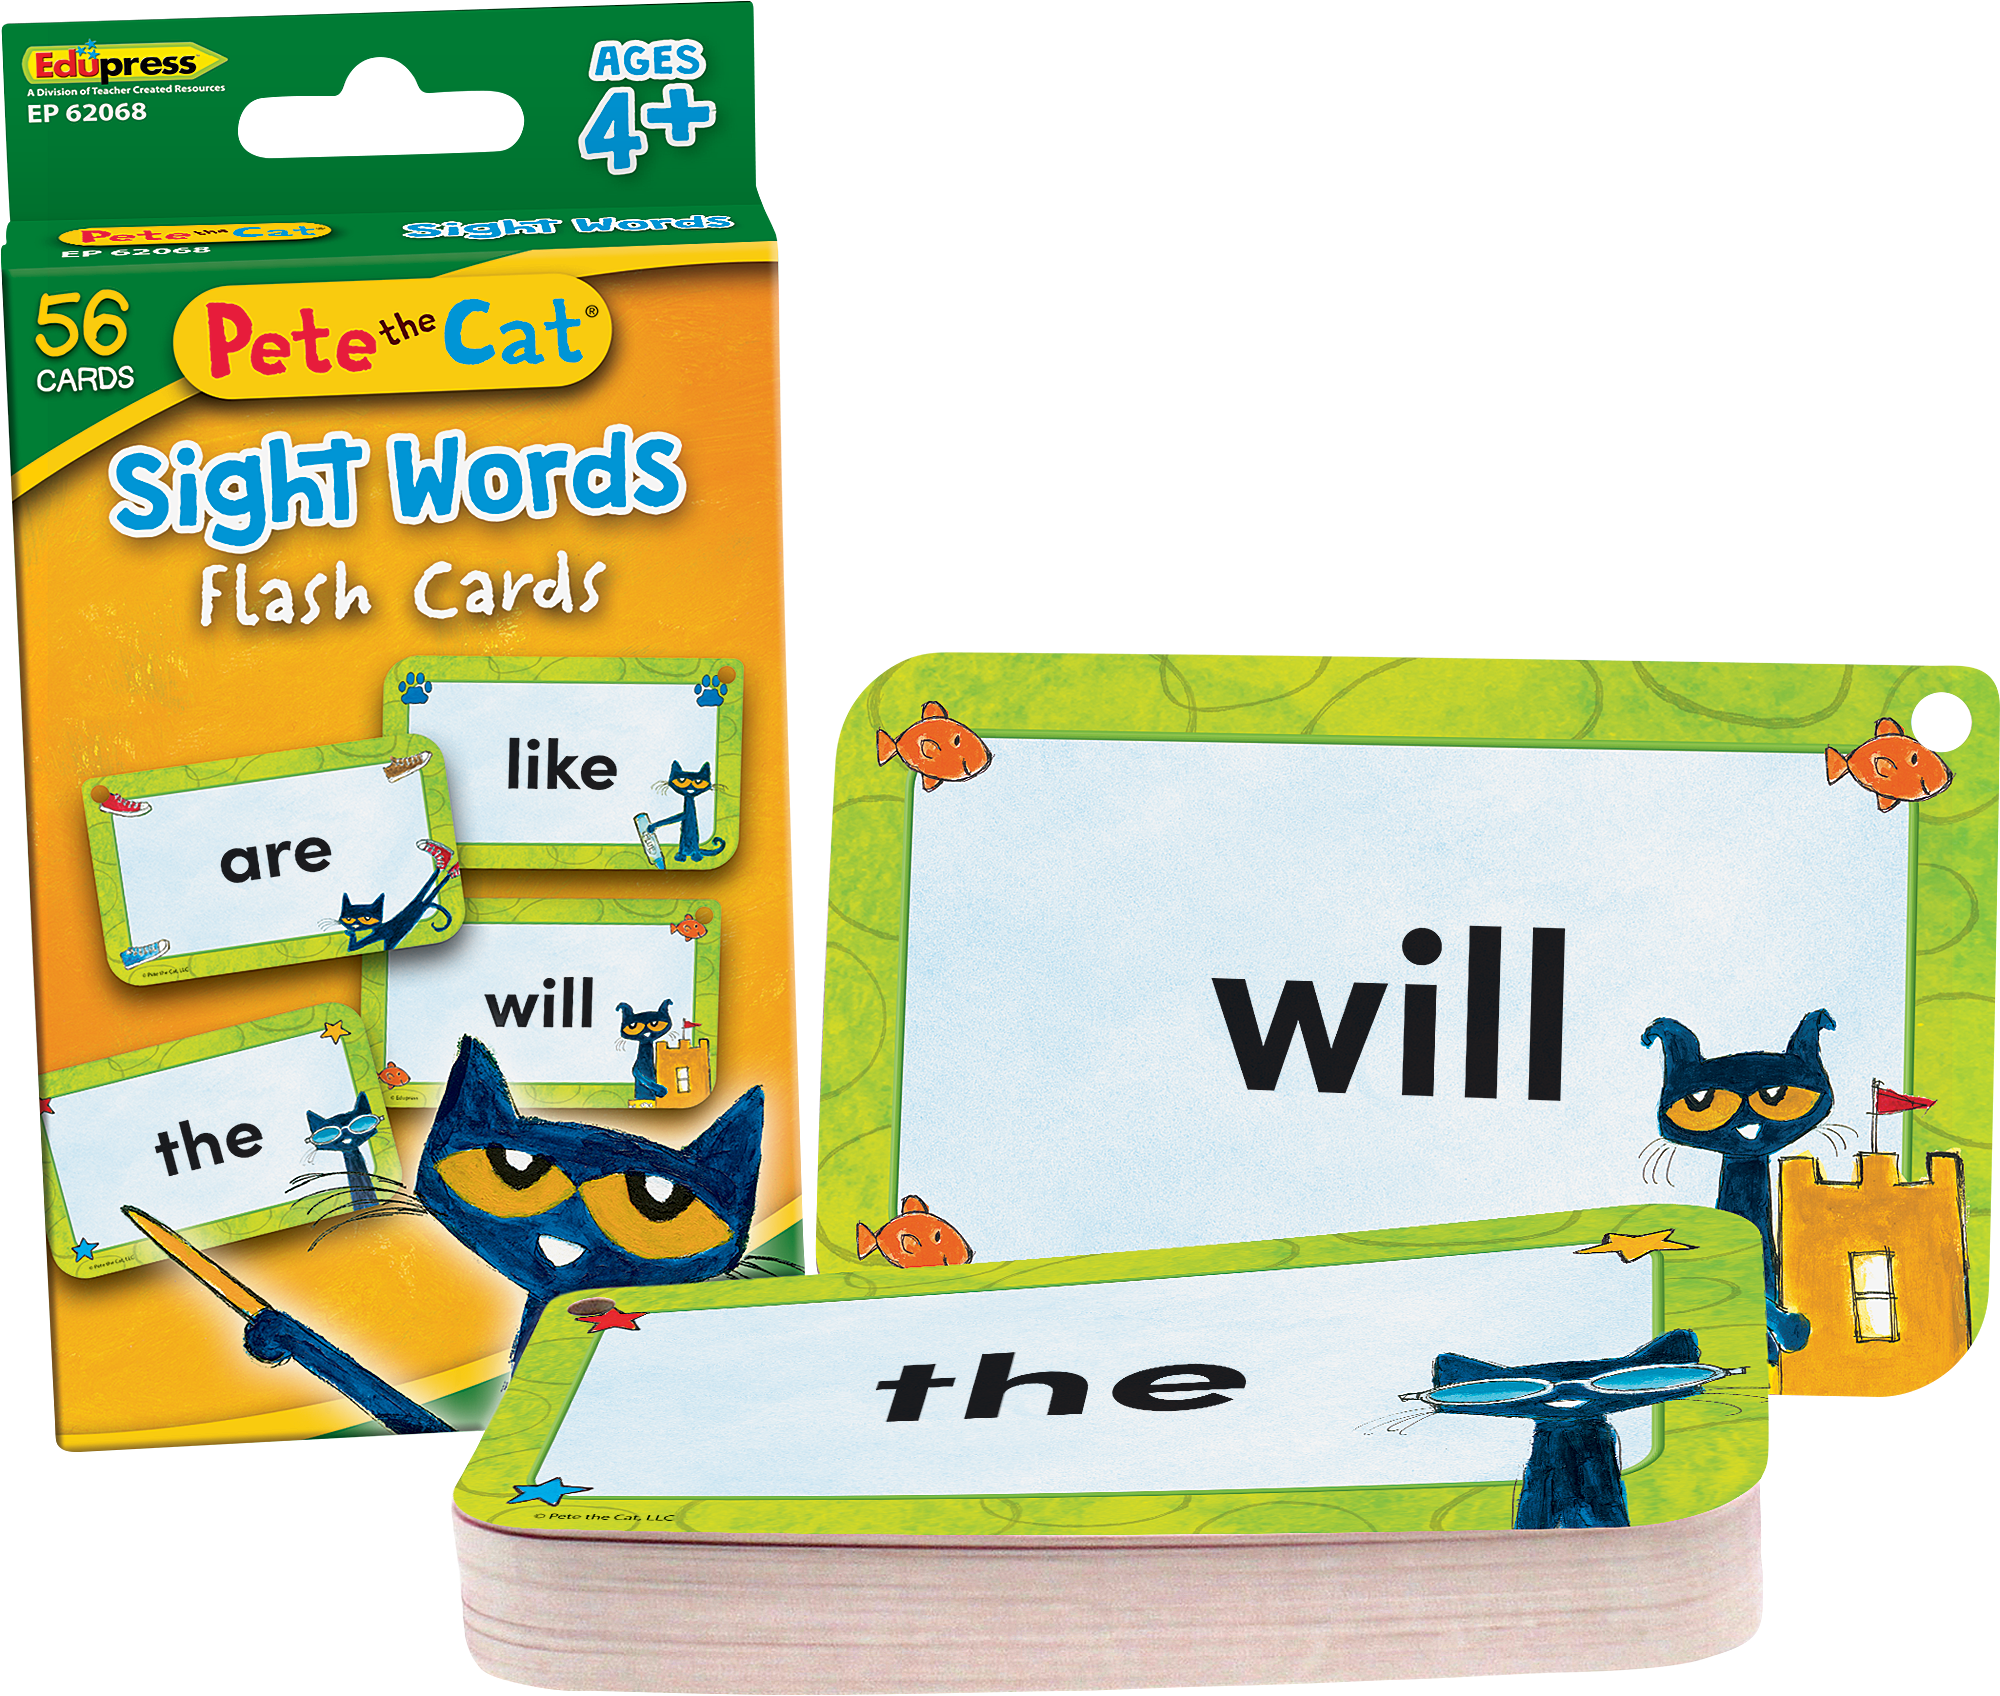 Pete the CatÂ® Sight Words Flash Cards